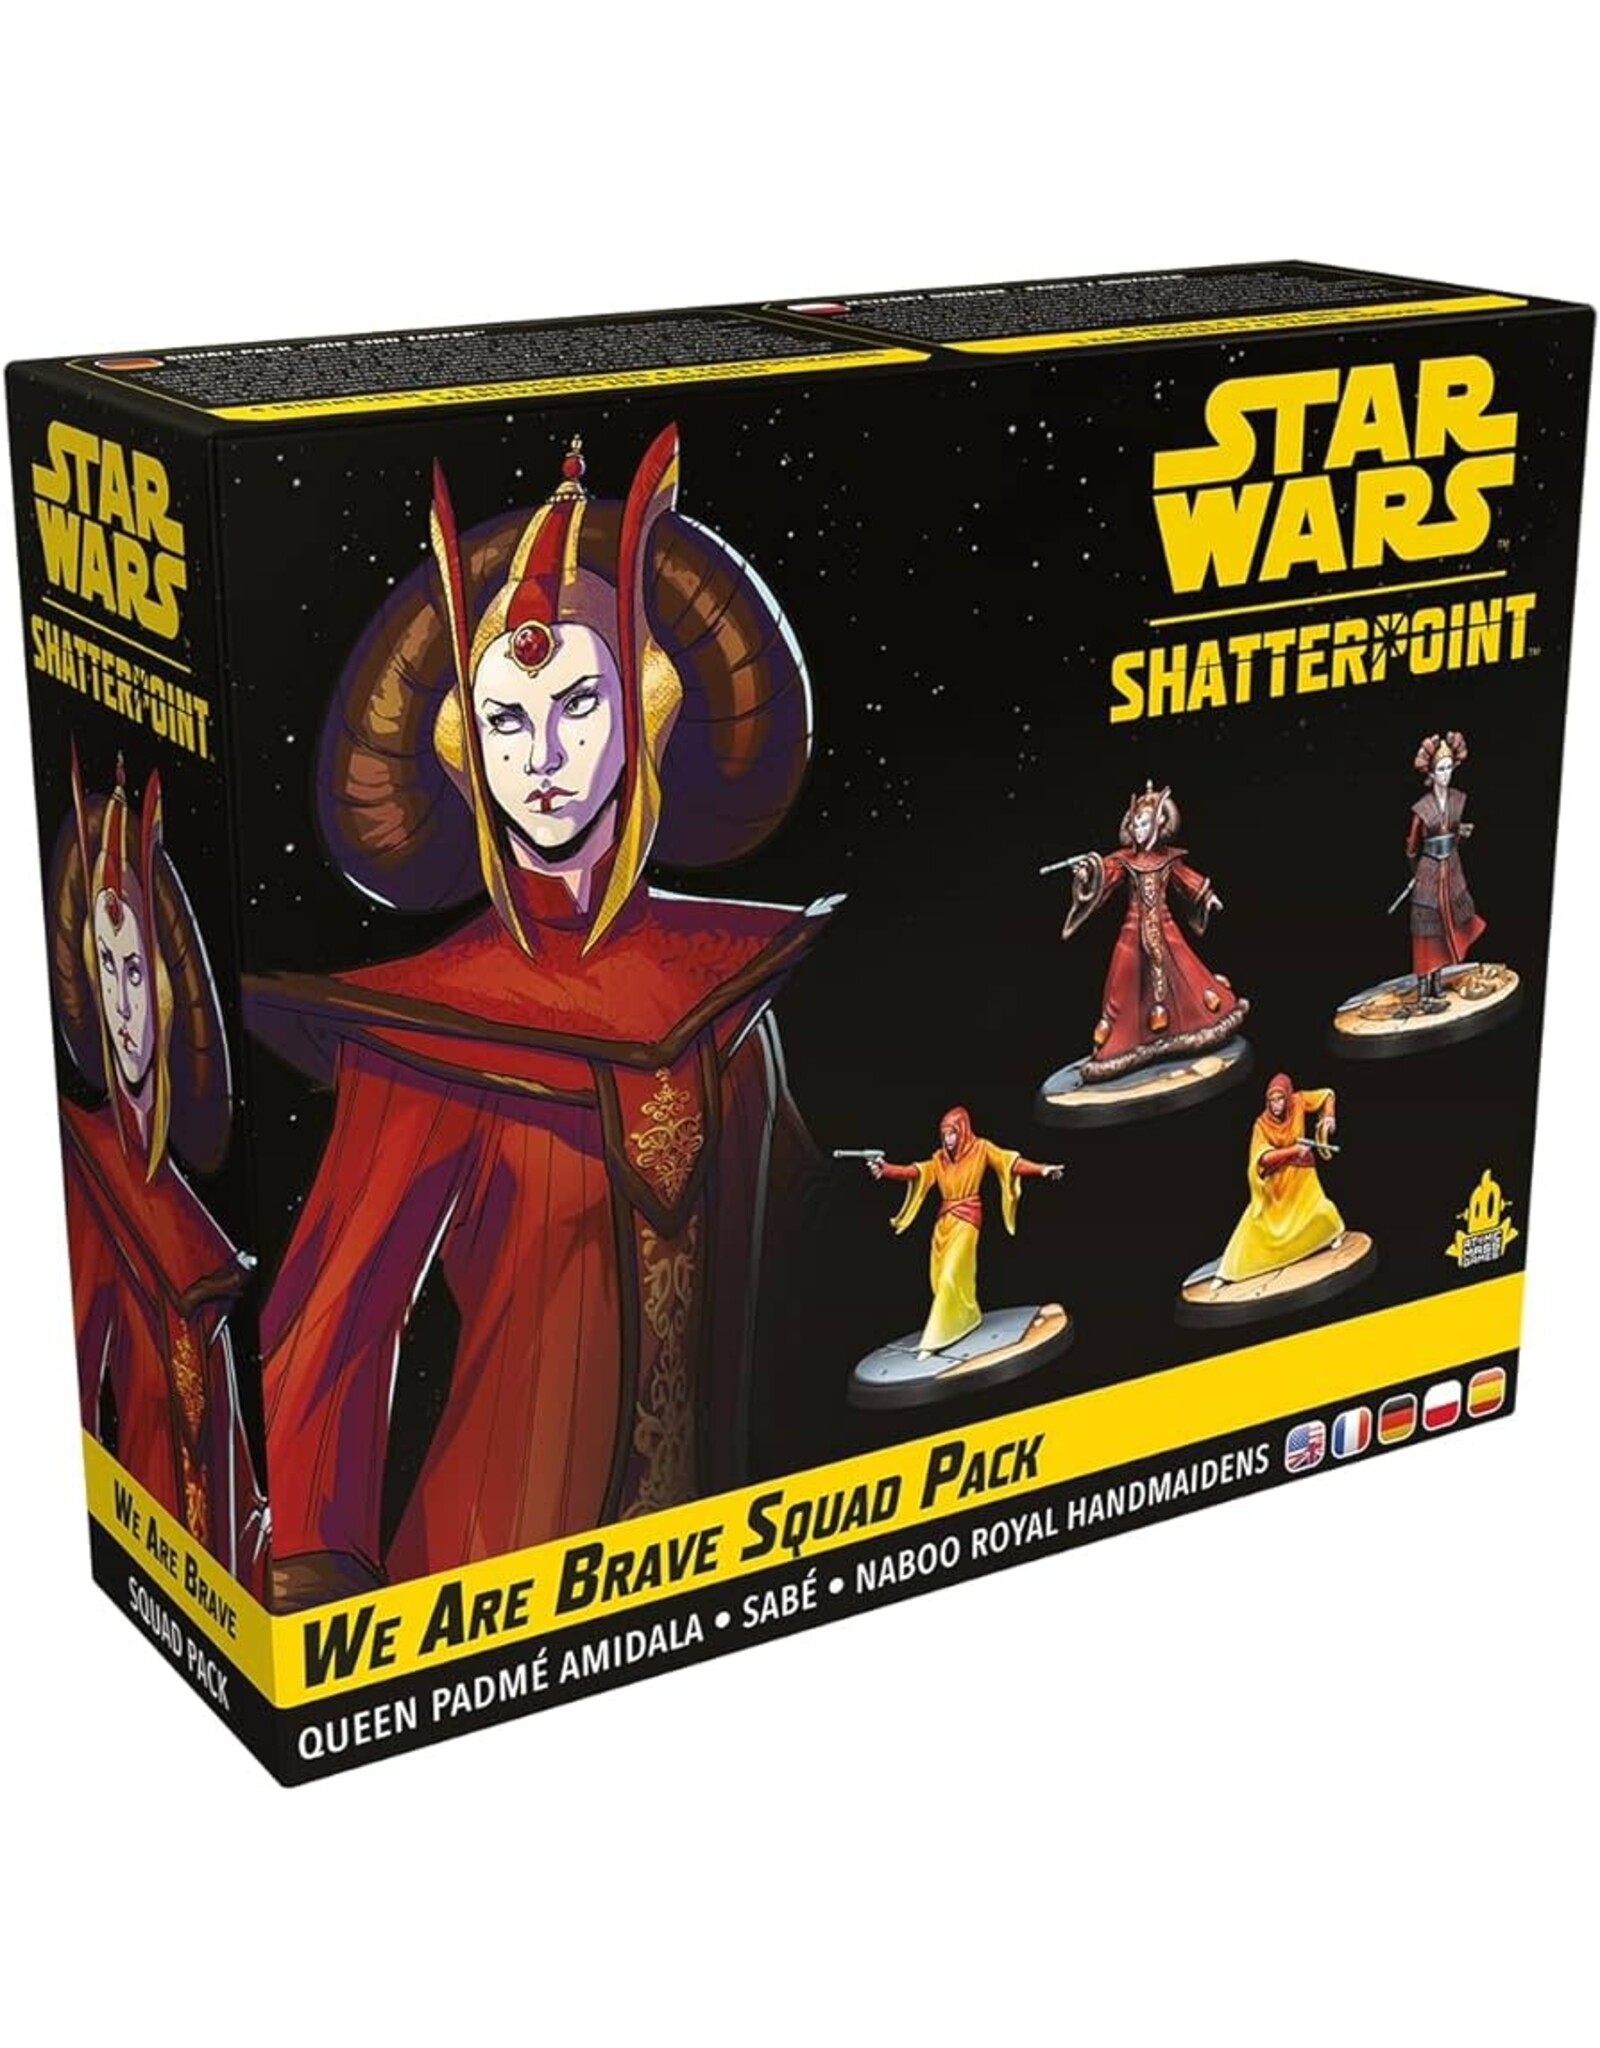 Star Wars Shatterpoint We are Brave Squad Pack (Queen Padme Amidala, Sabe, Naboo Royal Handmaidens)